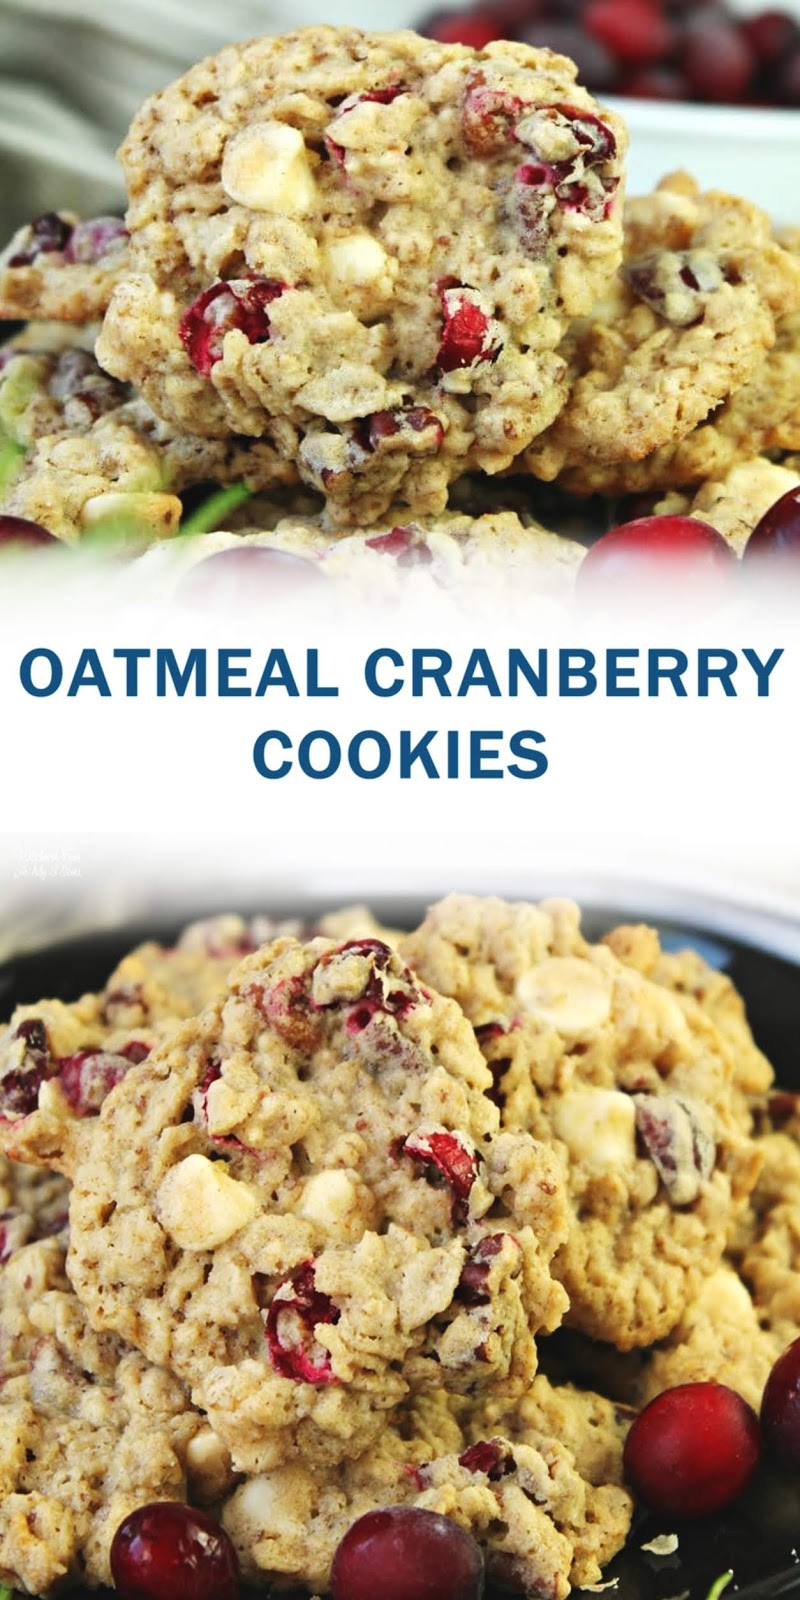 OATMEAL CRANBERRY COOKIES